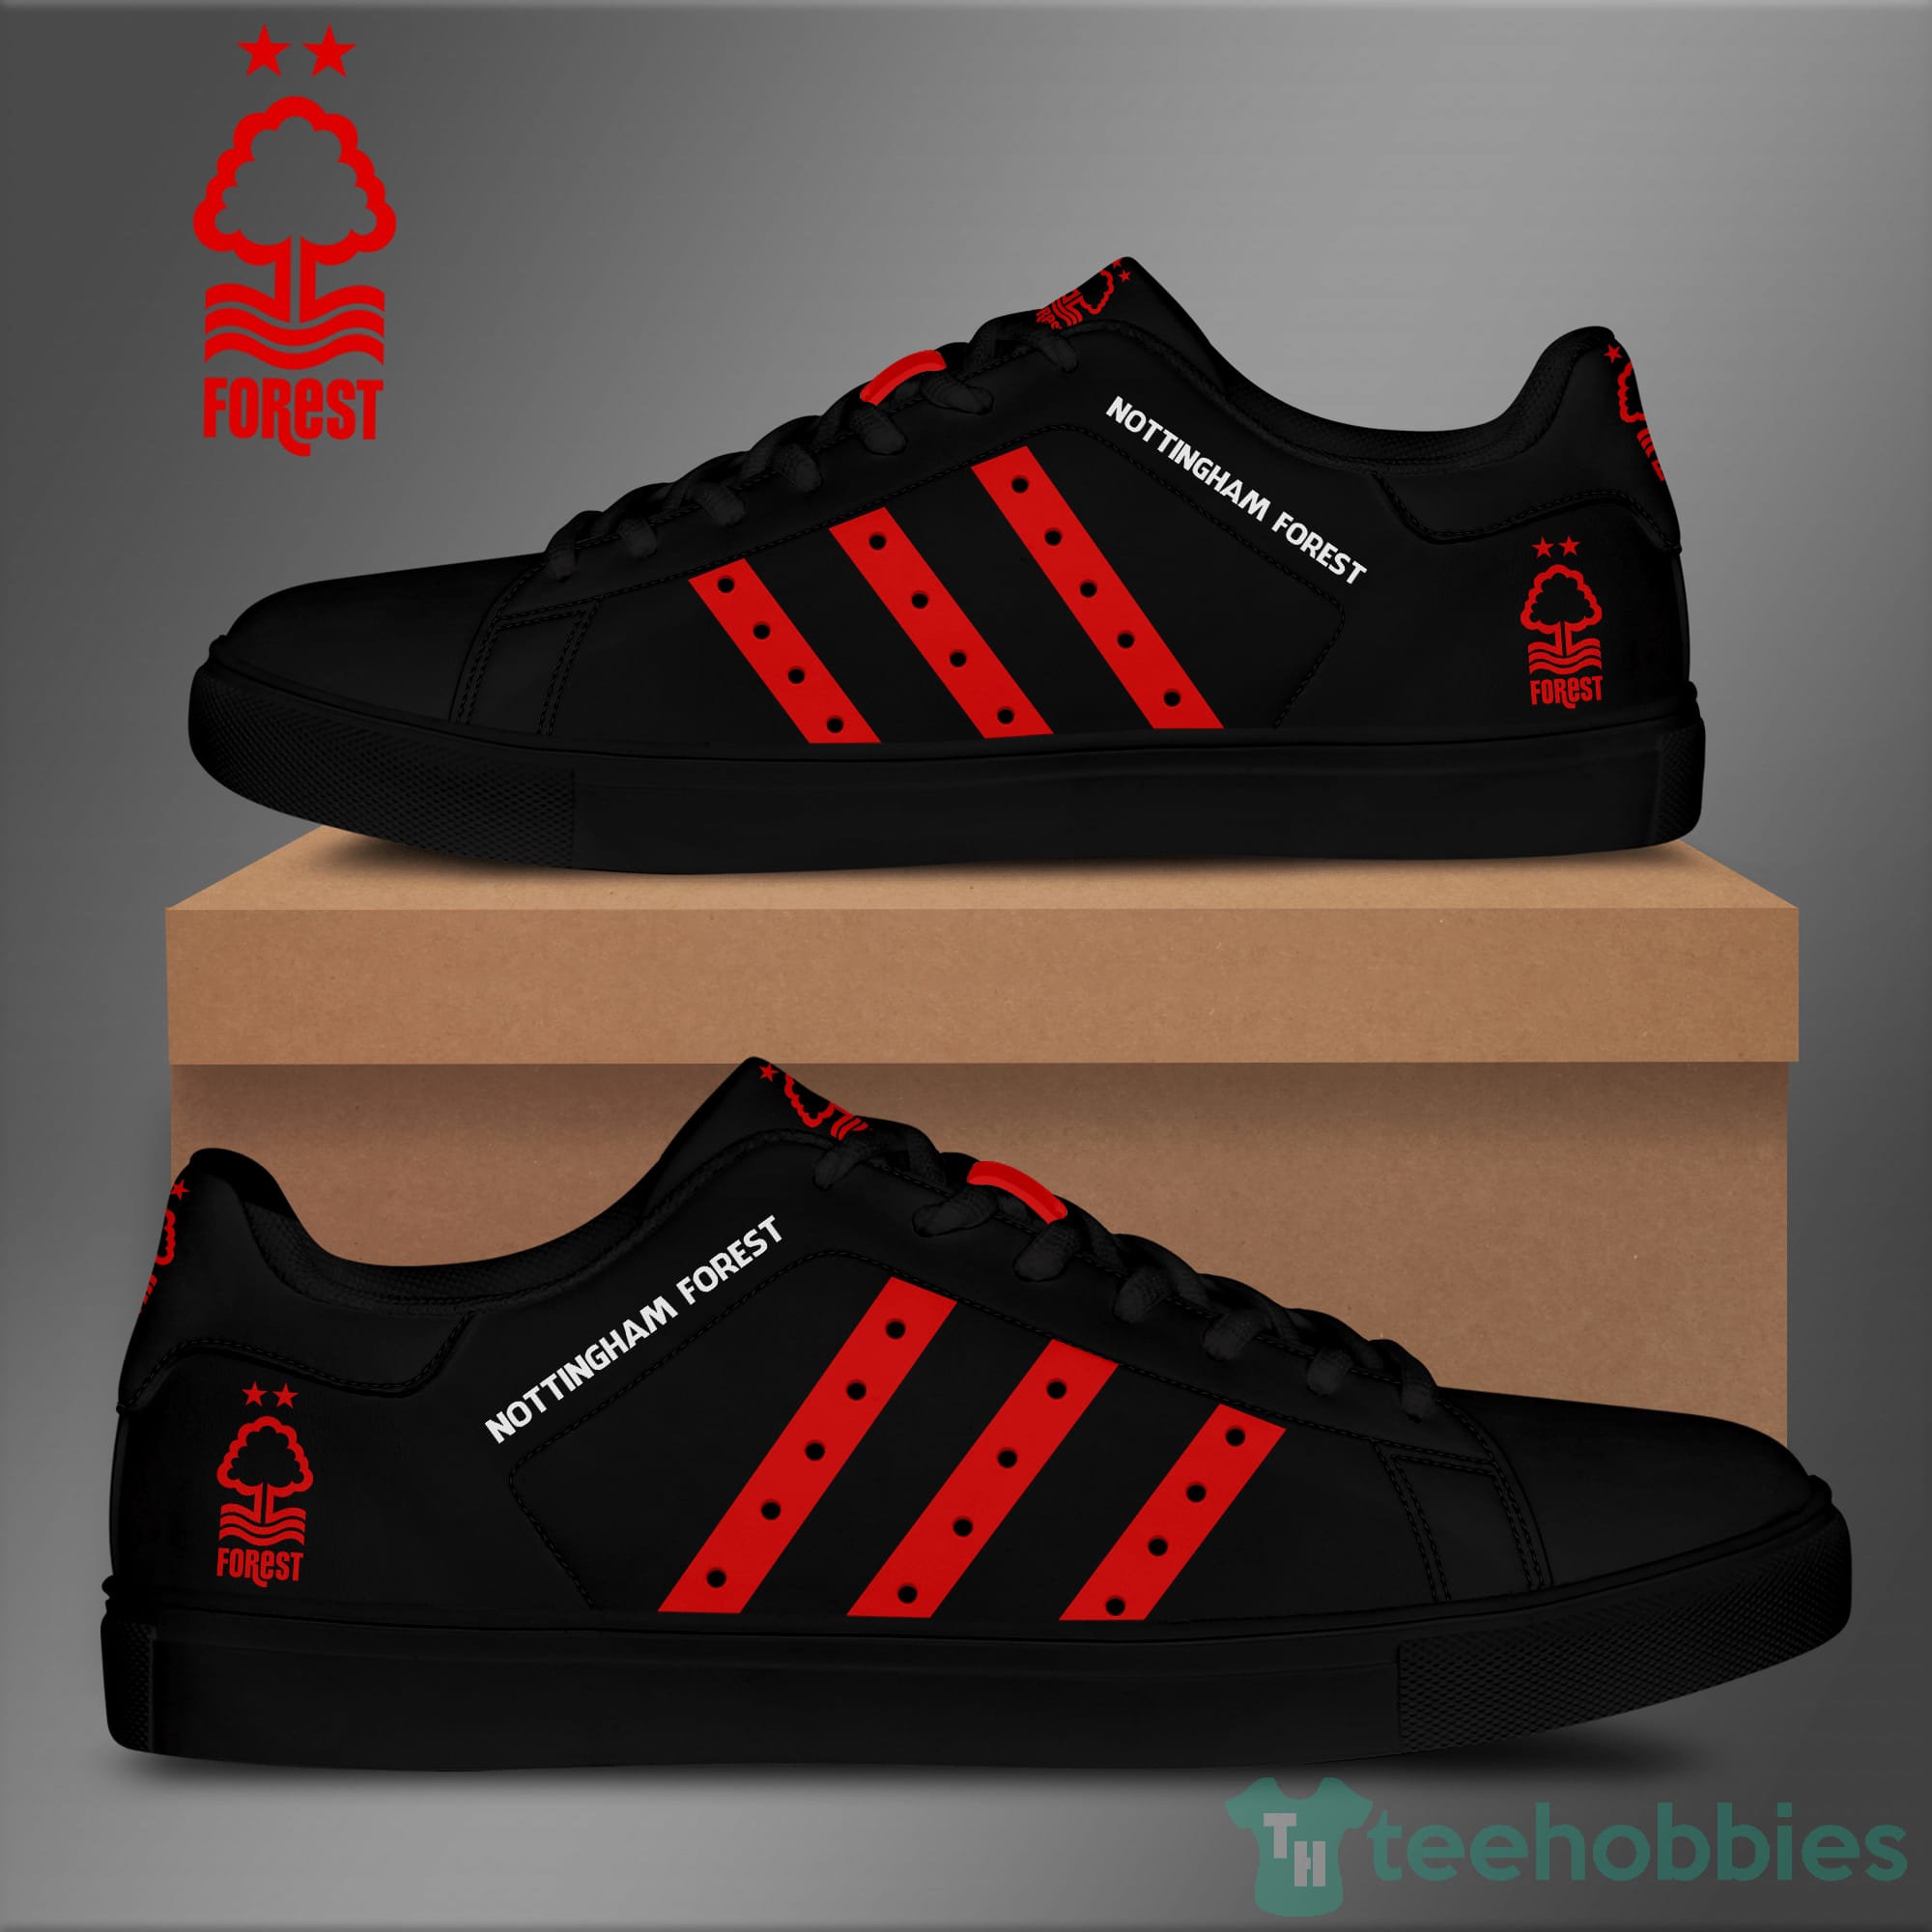 Nottingham Forest Fc Low Top Skate Shoes Product photo 1